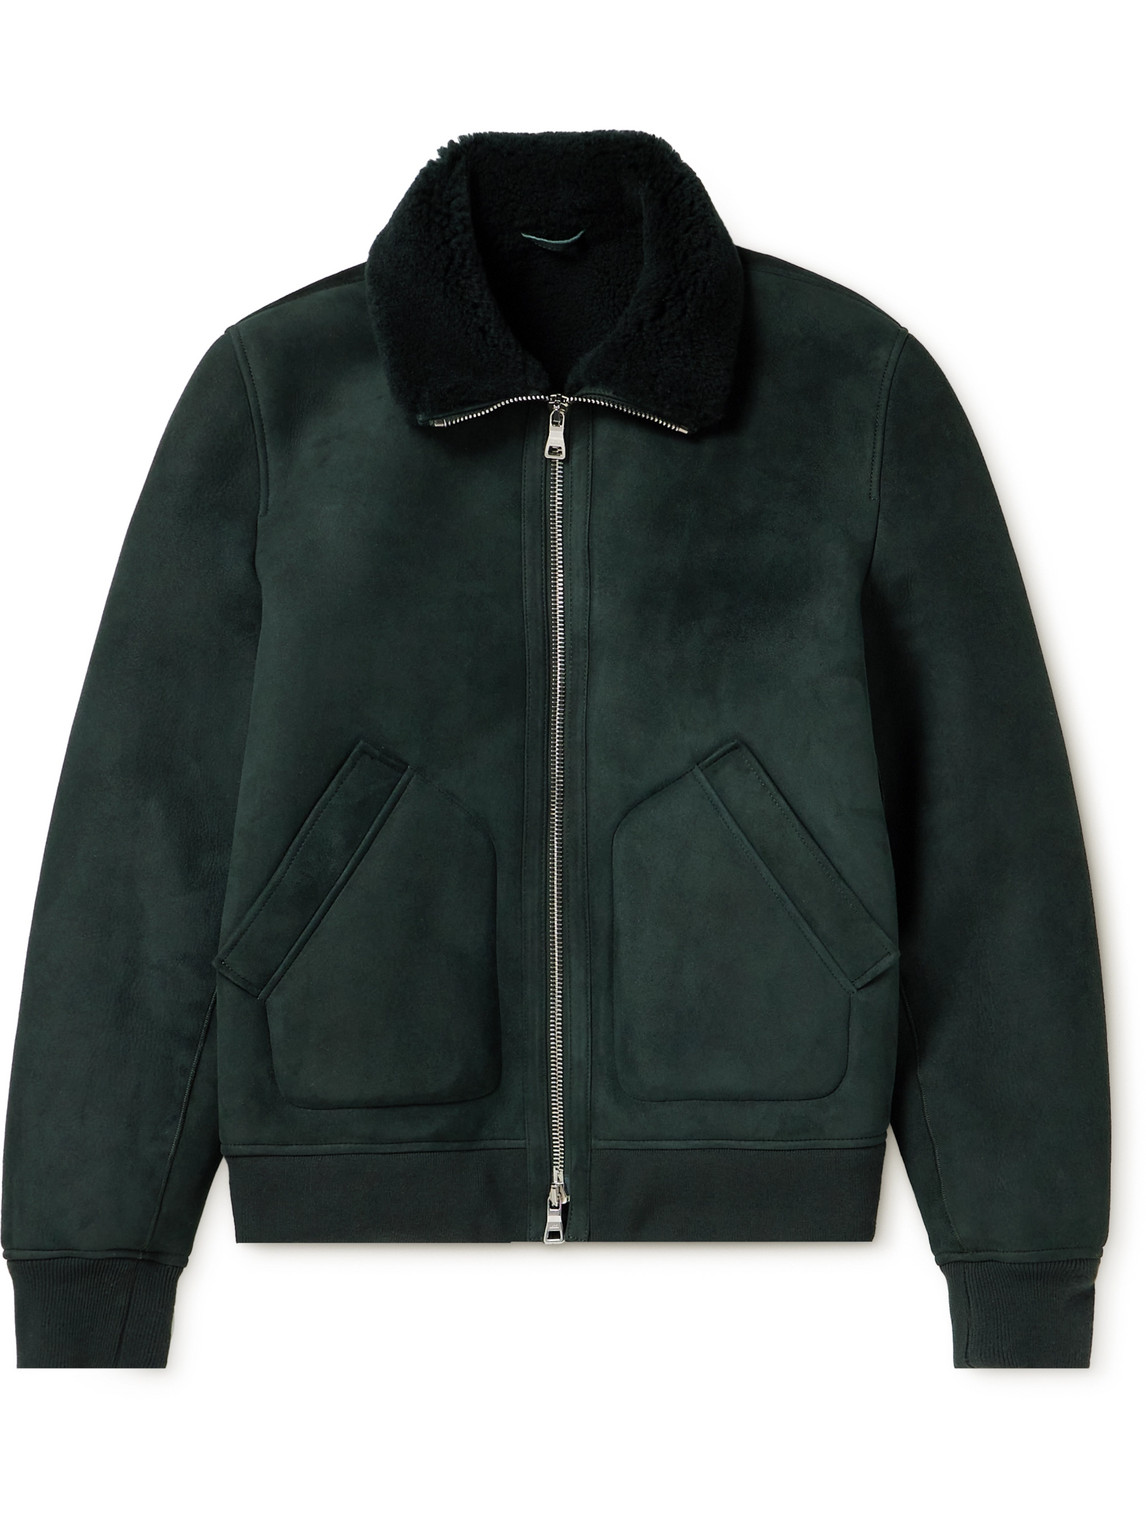 Mr P Shearling Jacket In Green